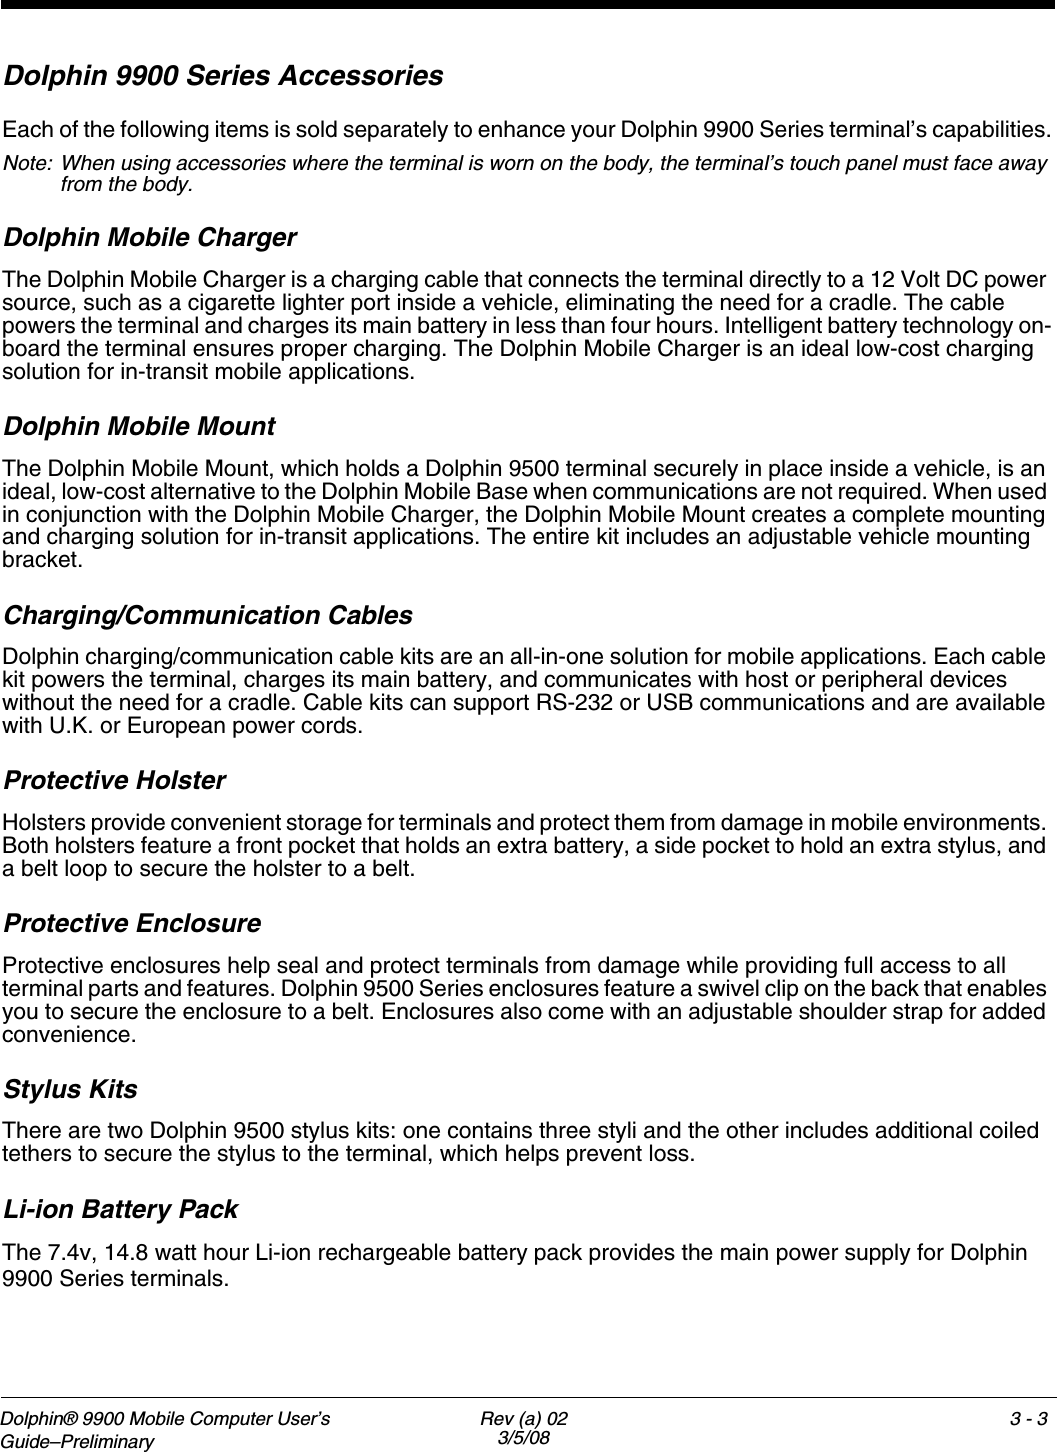 Dolphin® 9900 Mobile Computer User’s Guide–Preliminary Rev (a) 023/5/083 - 3Dolphin 9900 Series AccessoriesEach of the following items is sold separately to enhance your Dolphin 9900 Series terminal’s capabilities.Note: When using accessories where the terminal is worn on the body, the terminal’s touch panel must face away from the body.Dolphin Mobile Charger The Dolphin Mobile Charger is a charging cable that connects the terminal directly to a 12 Volt DC power source, such as a cigarette lighter port inside a vehicle, eliminating the need for a cradle. The cable powers the terminal and charges its main battery in less than four hours. Intelligent battery technology on-board the terminal ensures proper charging. The Dolphin Mobile Charger is an ideal low-cost charging solution for in-transit mobile applications.Dolphin Mobile MountThe Dolphin Mobile Mount, which holds a Dolphin 9500 terminal securely in place inside a vehicle, is an ideal, low-cost alternative to the Dolphin Mobile Base when communications are not required. When used in conjunction with the Dolphin Mobile Charger, the Dolphin Mobile Mount creates a complete mounting and charging solution for in-transit applications. The entire kit includes an adjustable vehicle mounting bracket.Charging/Communication CablesDolphin charging/communication cable kits are an all-in-one solution for mobile applications. Each cable kit powers the terminal, charges its main battery, and communicates with host or peripheral devices without the need for a cradle. Cable kits can support RS-232 or USB communications and are available with U.K. or European power cords.Protective HolsterHolsters provide convenient storage for terminals and protect them from damage in mobile environments. Both holsters feature a front pocket that holds an extra battery, a side pocket to hold an extra stylus, and a belt loop to secure the holster to a belt.Protective EnclosureProtective enclosures help seal and protect terminals from damage while providing full access to all terminal parts and features. Dolphin 9500 Series enclosures feature a swivel clip on the back that enables you to secure the enclosure to a belt. Enclosures also come with an adjustable shoulder strap for added convenience.Stylus KitsThere are two Dolphin 9500 stylus kits: one contains three styli and the other includes additional coiled tethers to secure the stylus to the terminal, which helps prevent loss. Li-ion Battery Pack The 7.4v, 14.8 watt hour Li-ion rechargeable battery pack provides the main power supply for Dolphin 9900 Series terminals. 